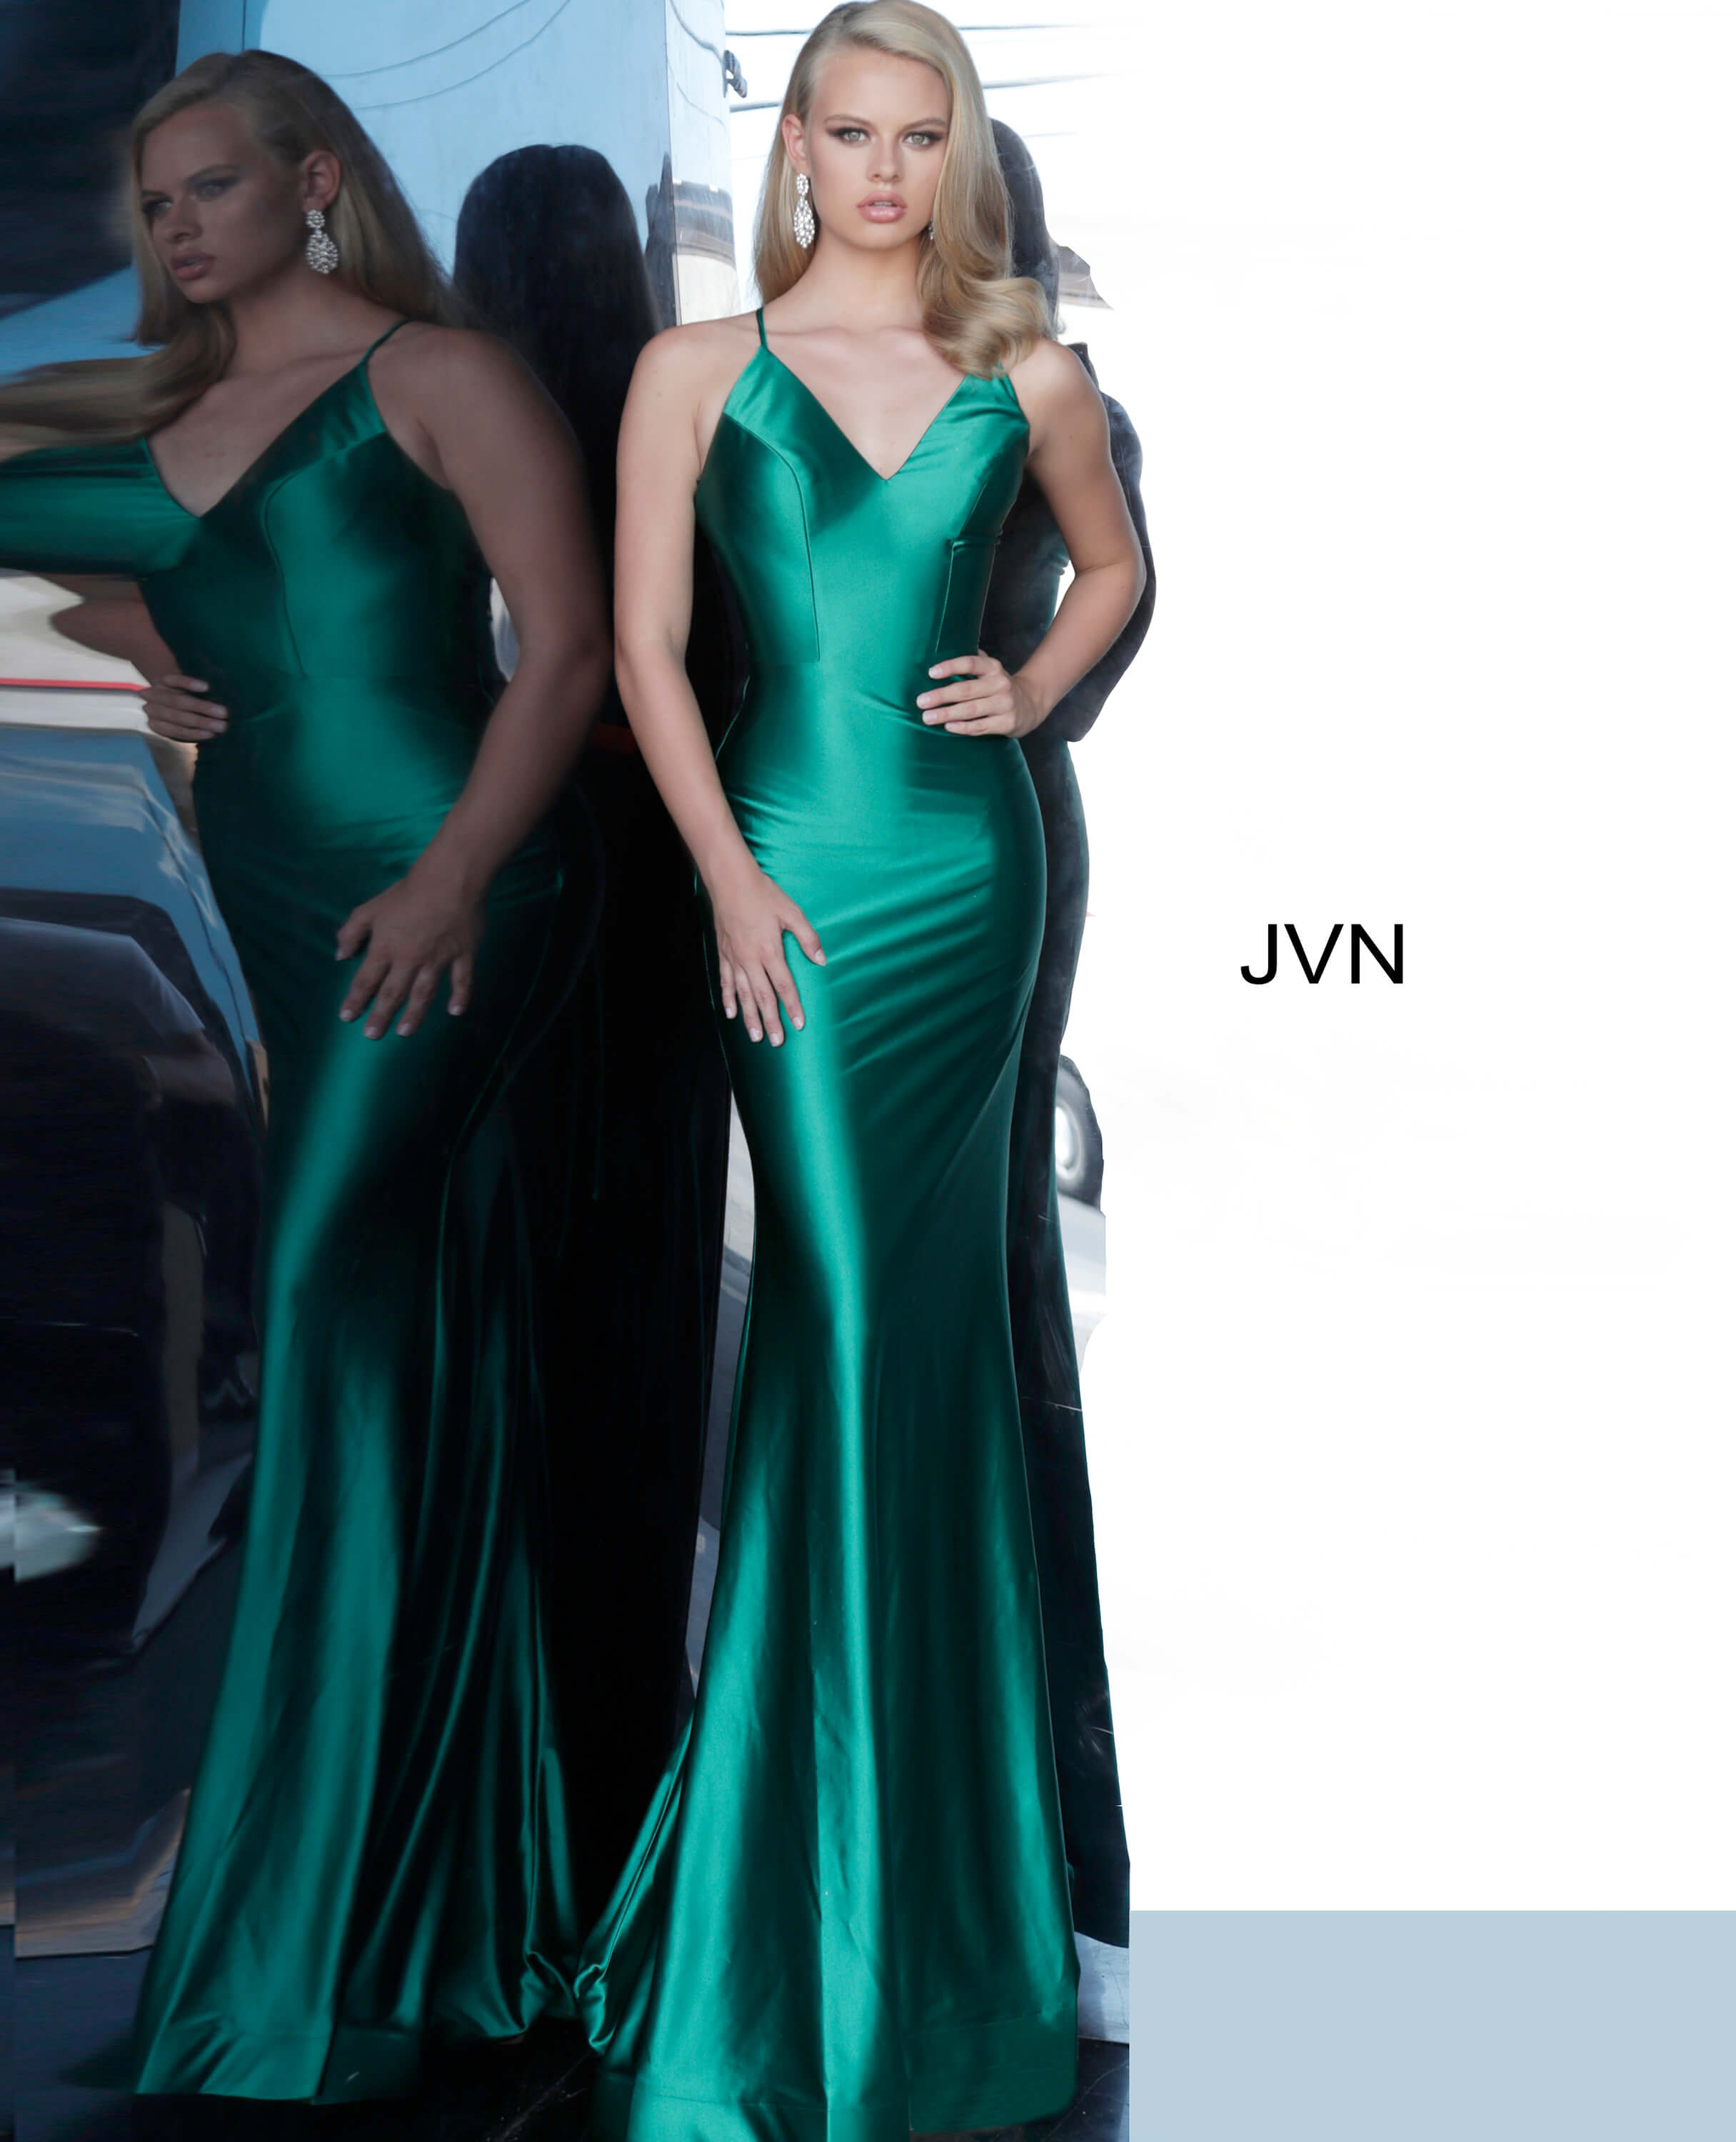 emerald green fitted prom dress